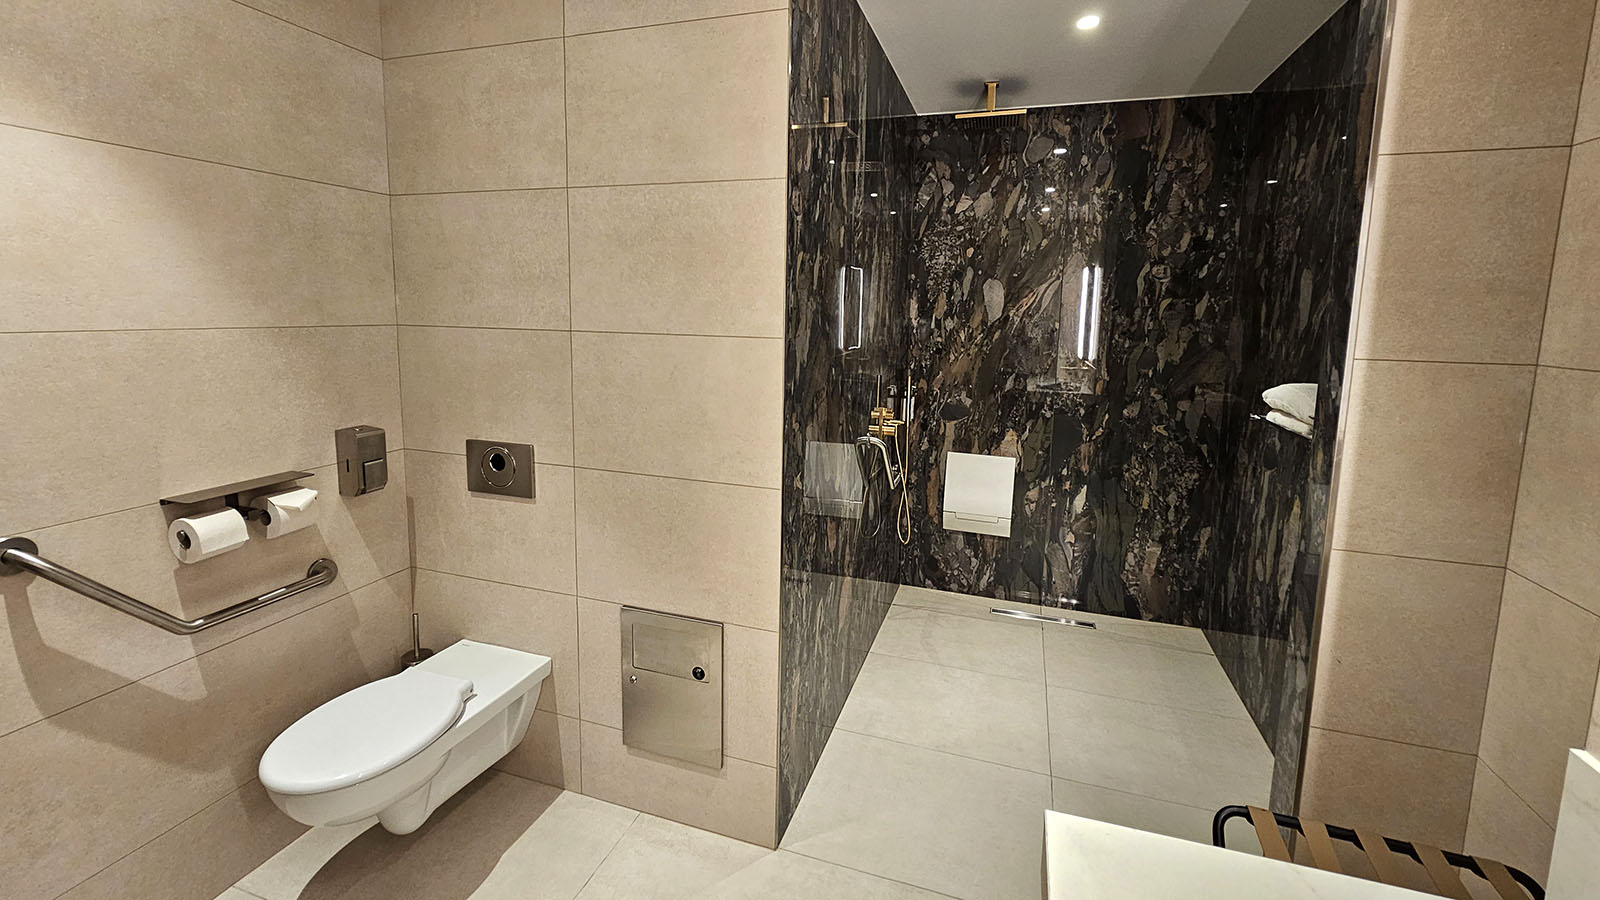 Large shower and restroom in the Star Alliance Lounge, Paris